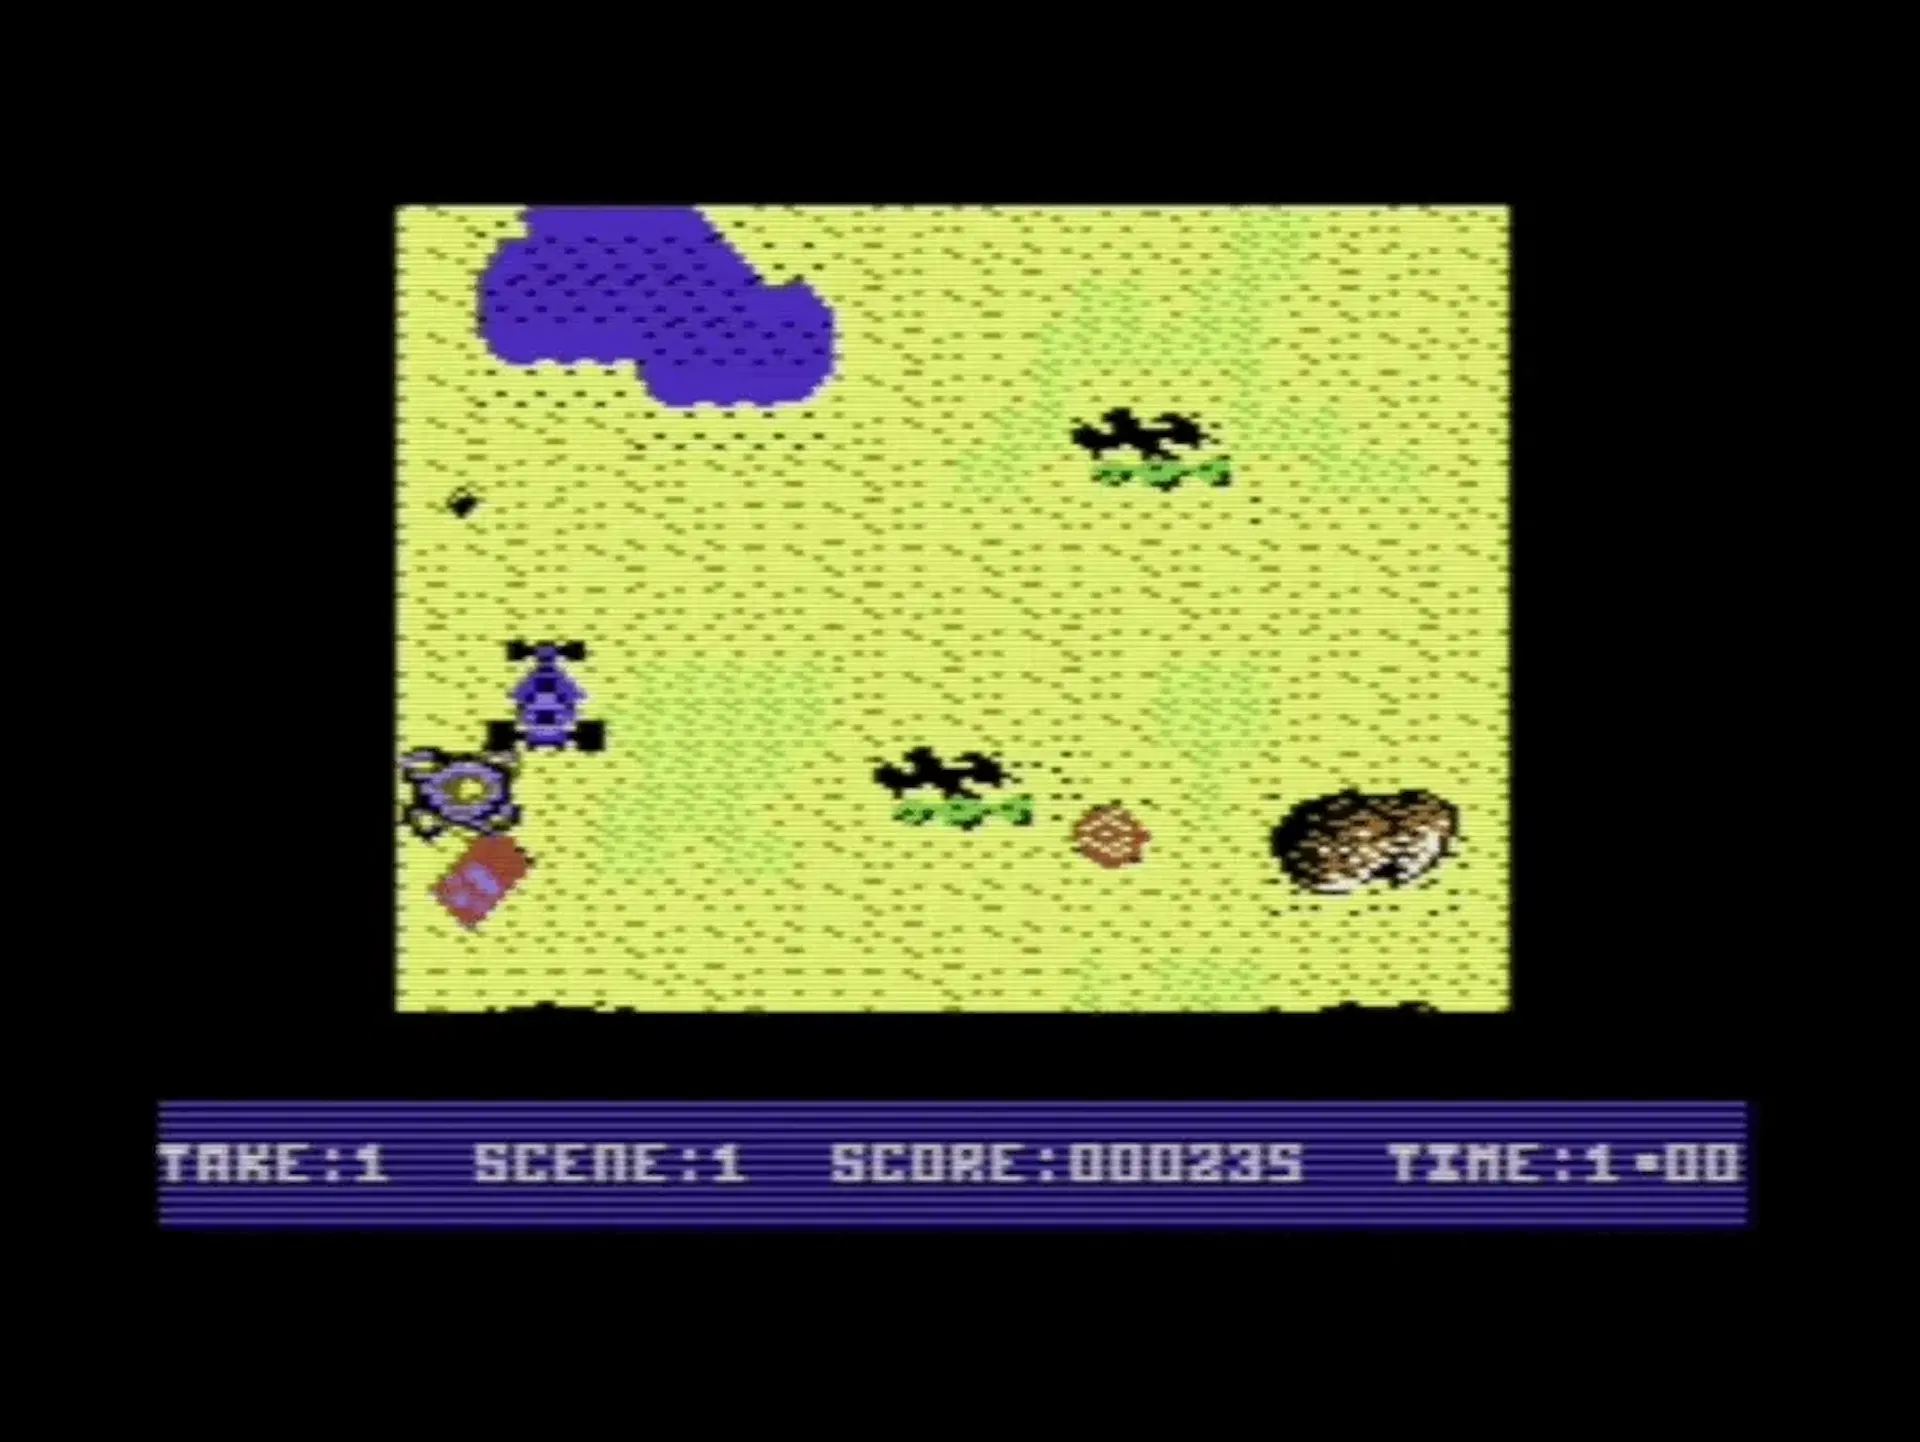 Commodore 64 version - those sprites look ripped out of "Miami Vice", and that's not a good sign.